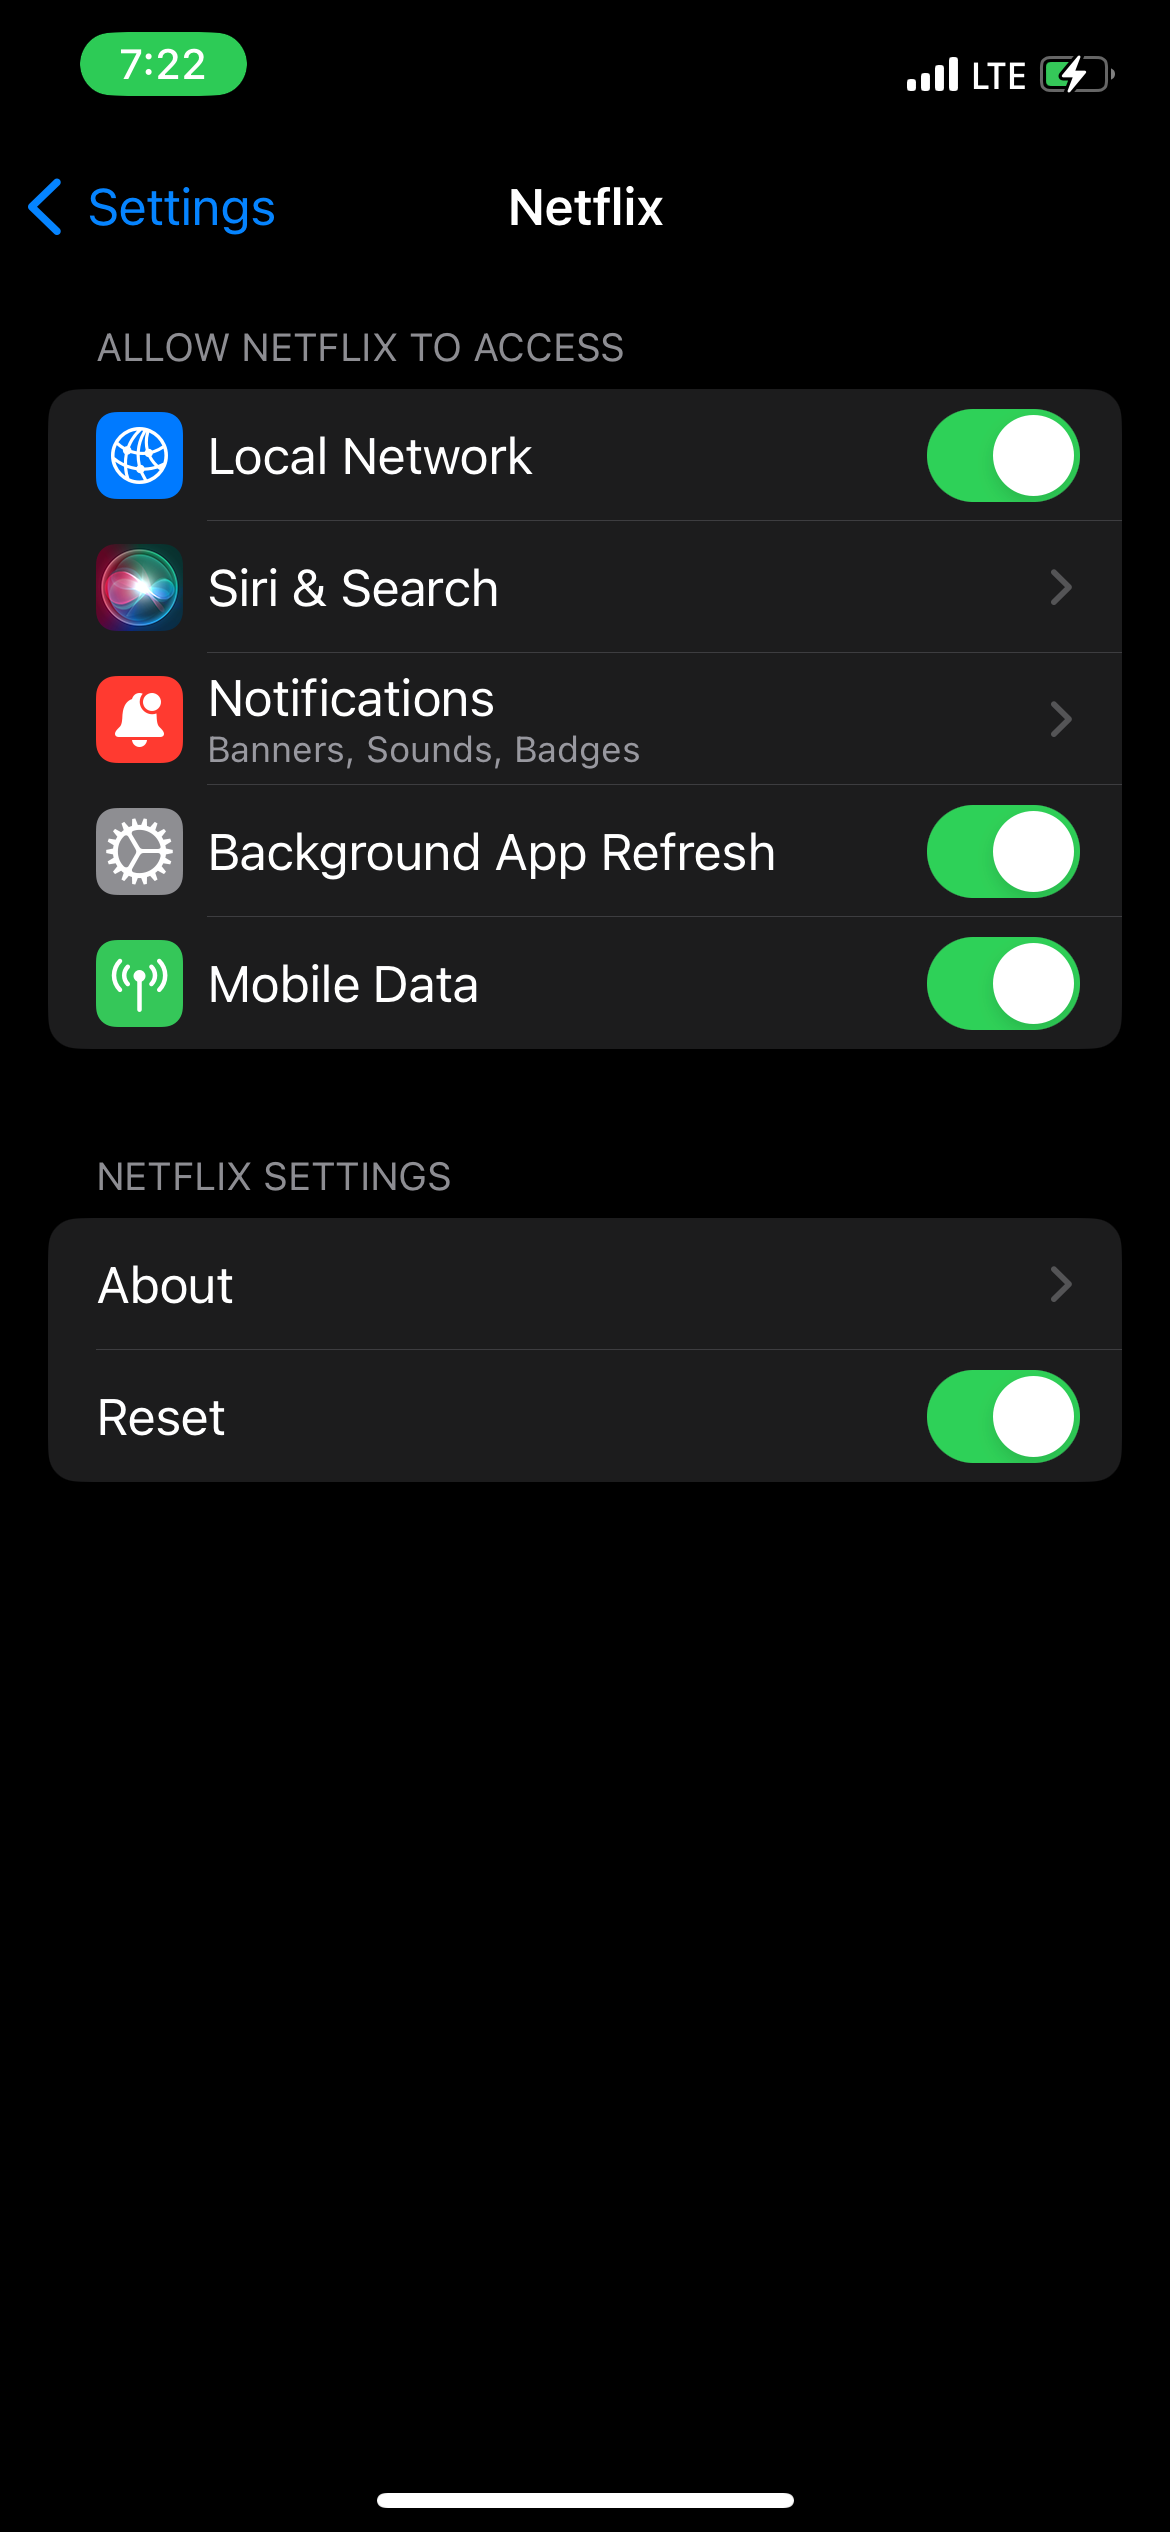 Enable the reset option in the Netflix settings on iOS.